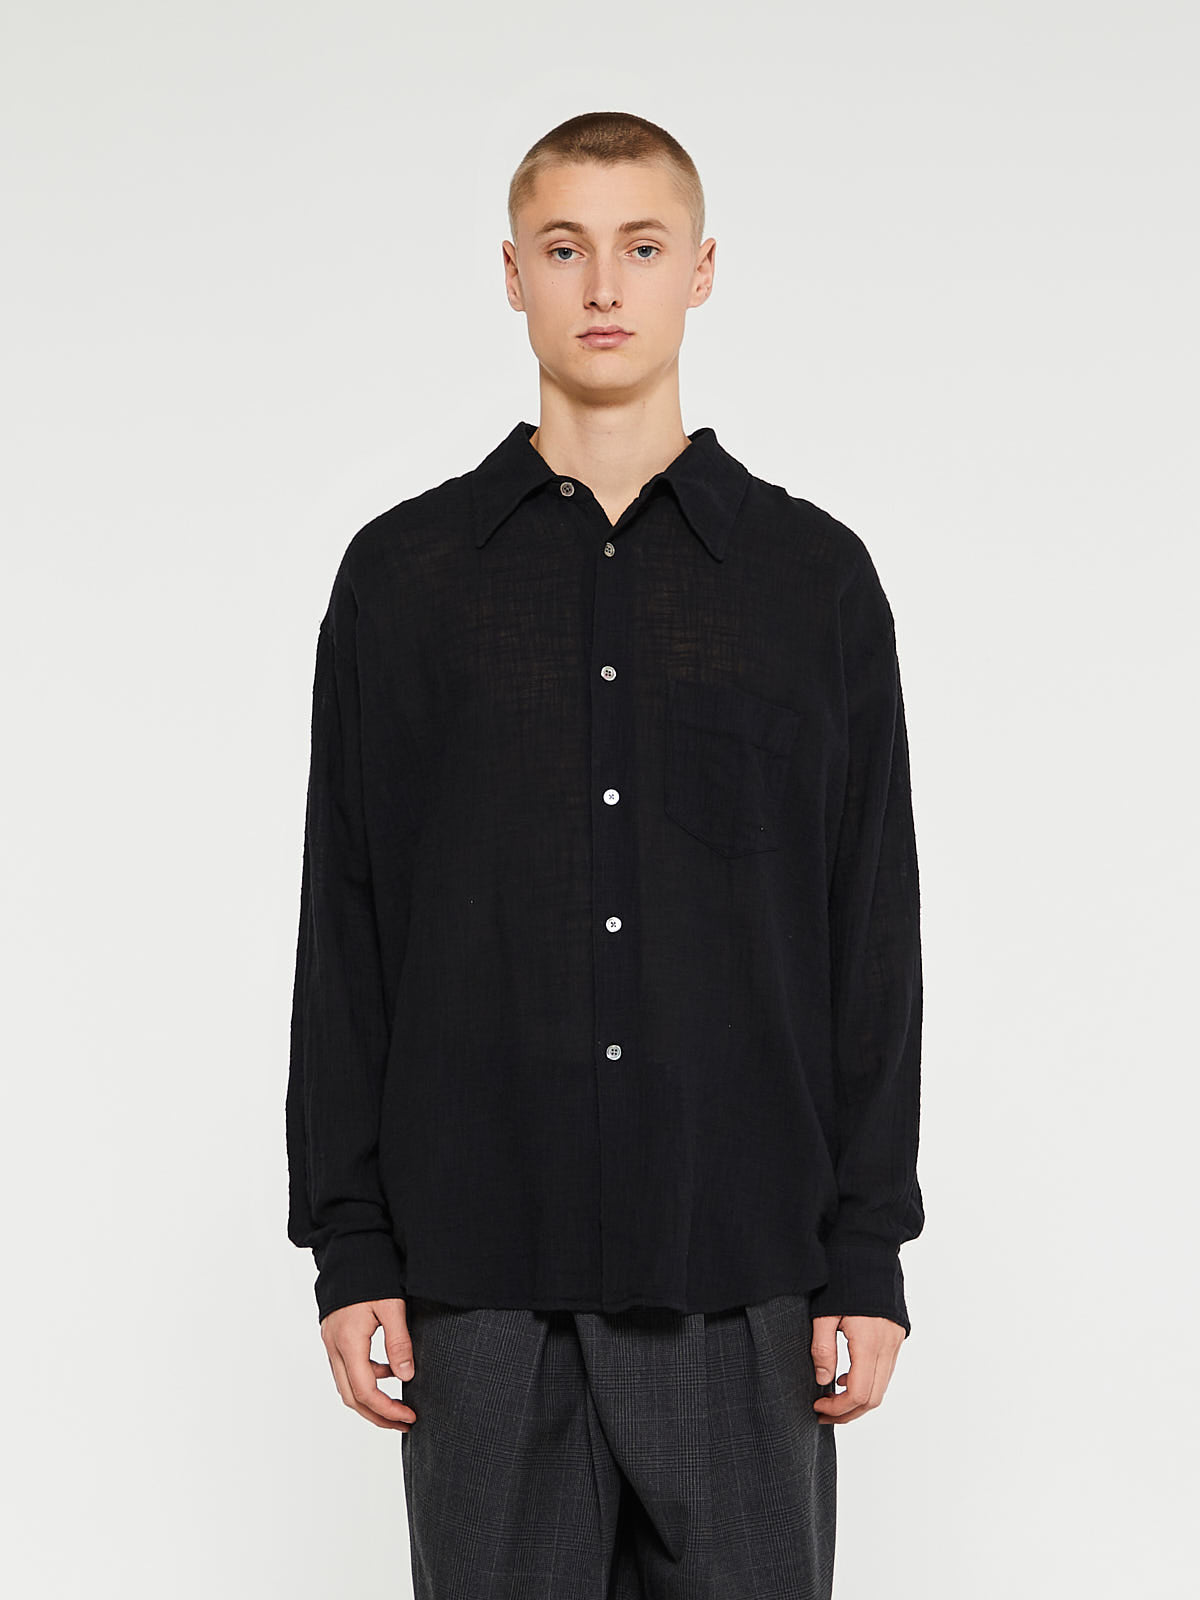 Coco Shirt in Washed Black Air Cotton